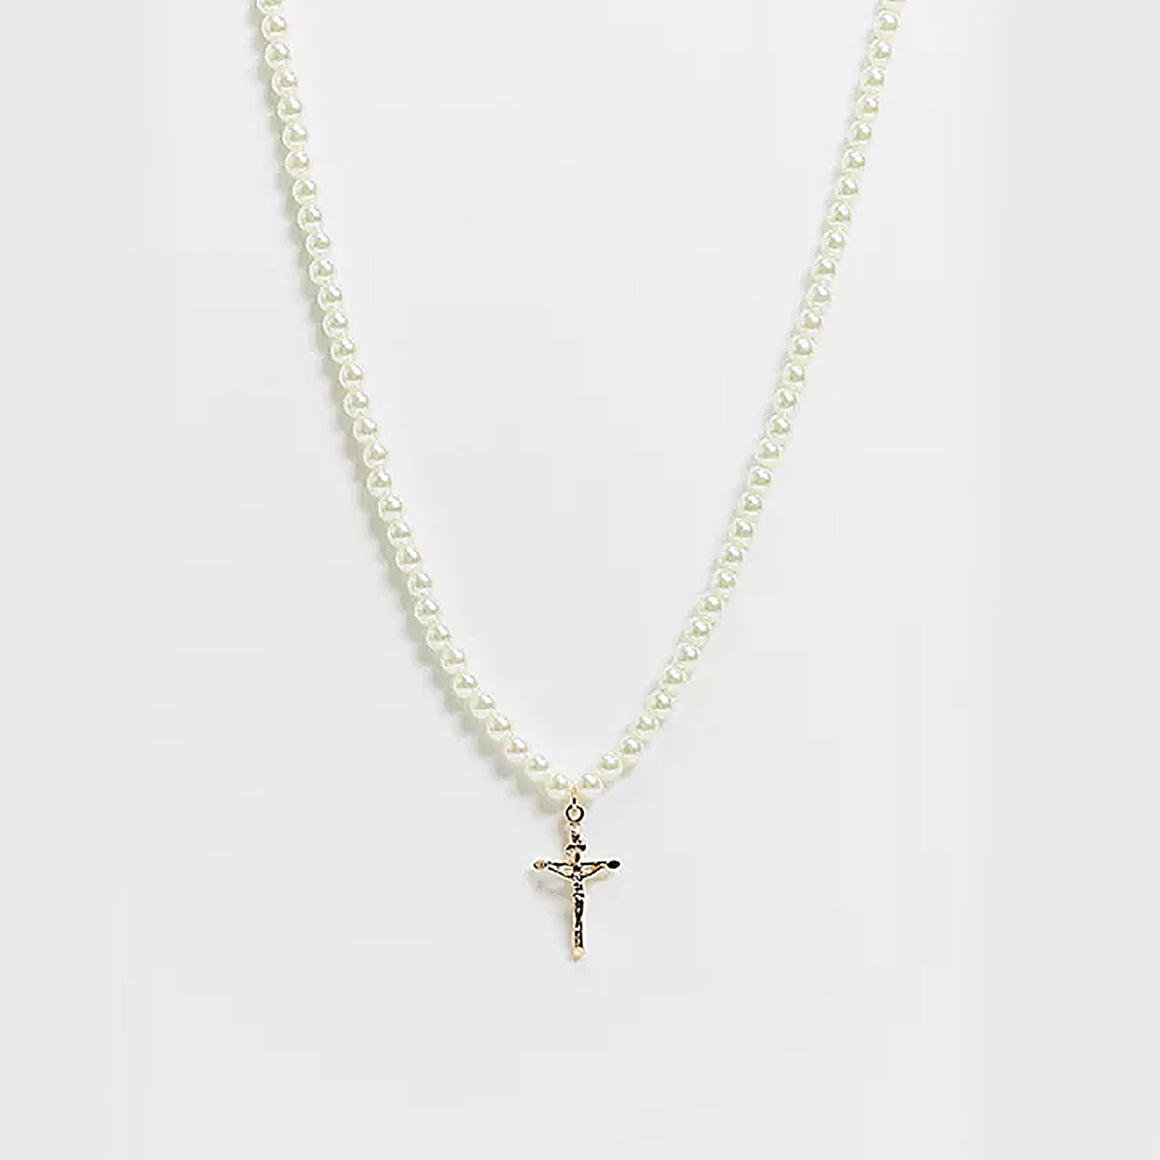 54 FLORAL CRUCIFIX CROSS PENDANT PEARL NECKLACE BEAD NECKLACE CHAIN